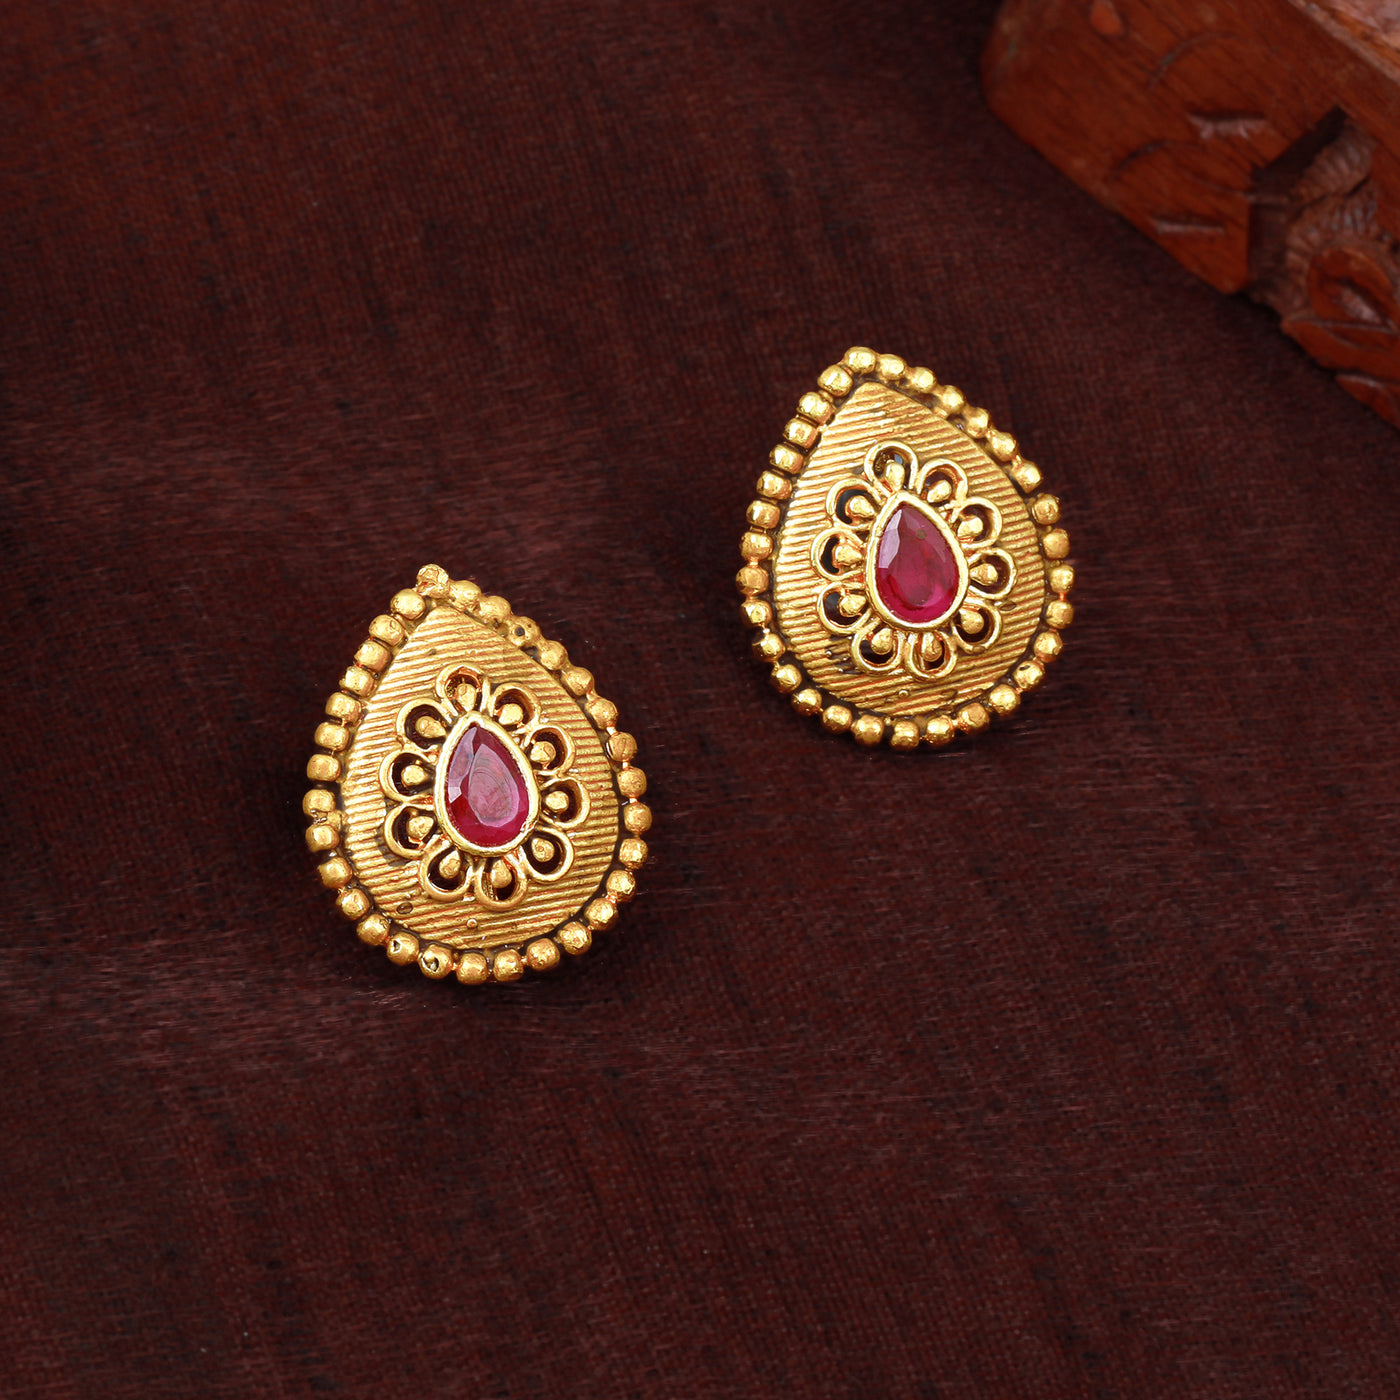 Estele Gold Plated Drop Designer Matt Finish Stud Earrings with Ruby Crystals for Women